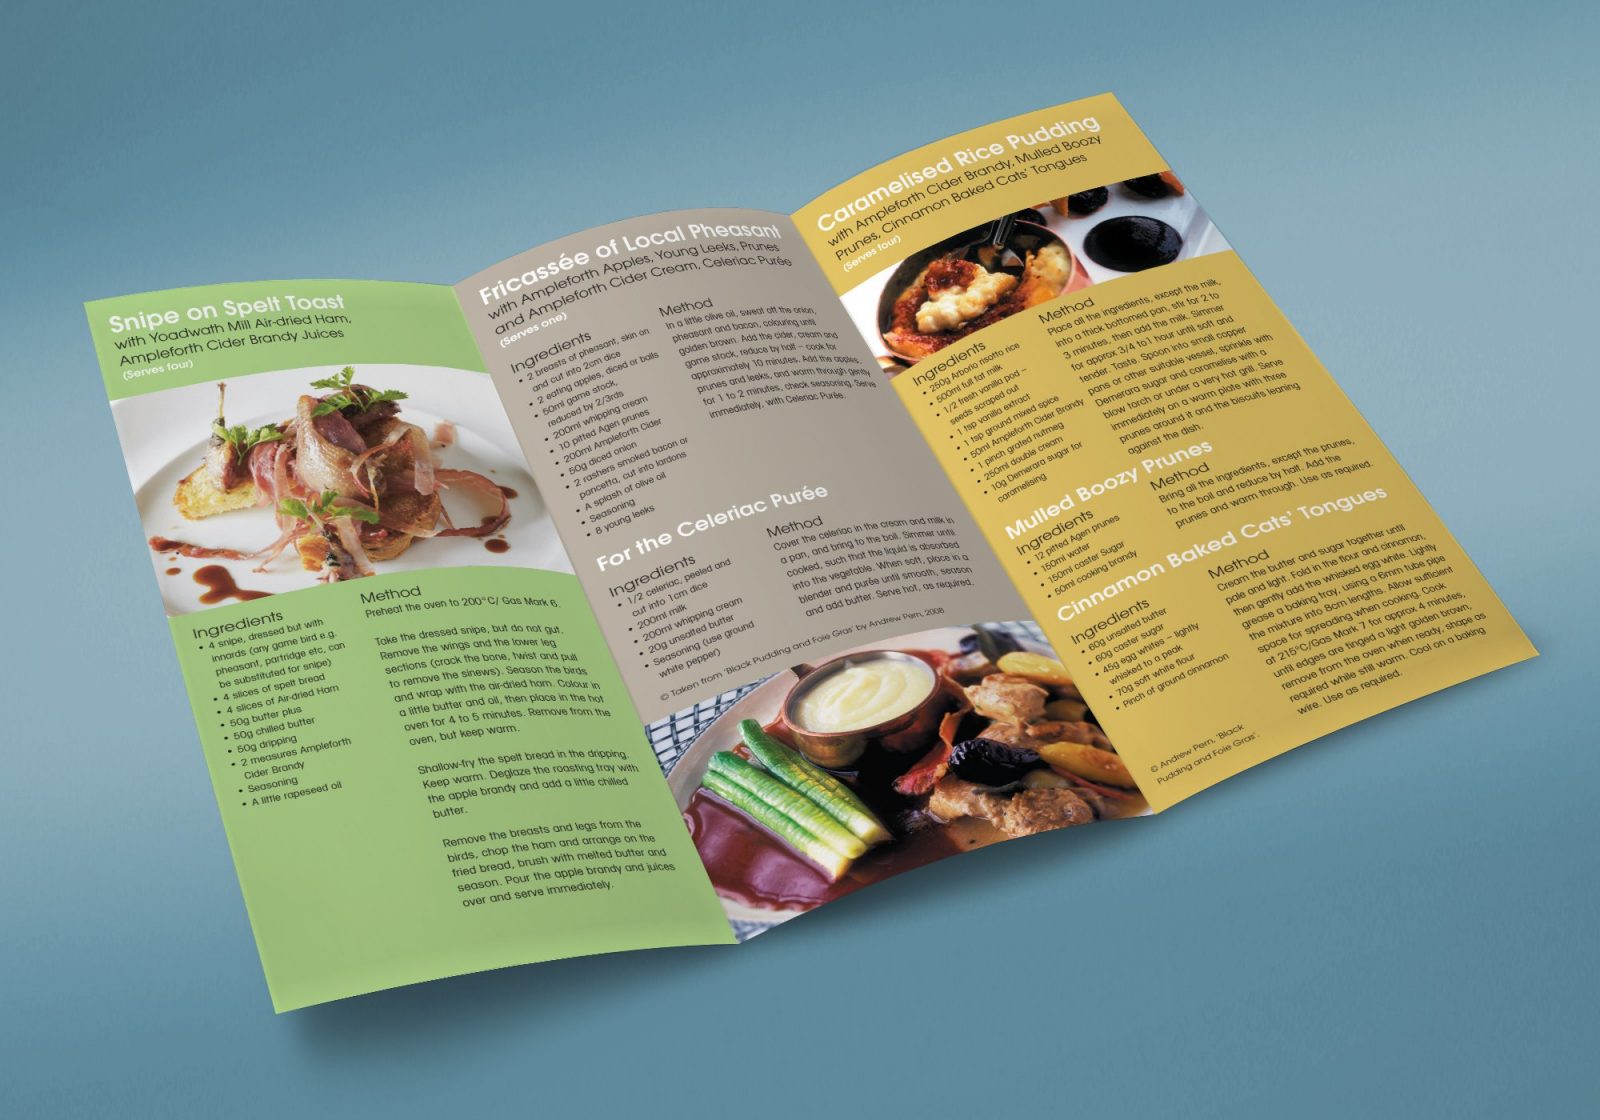 An A4 folded leaflet design for Ampleforth Abbey Drinks recipes